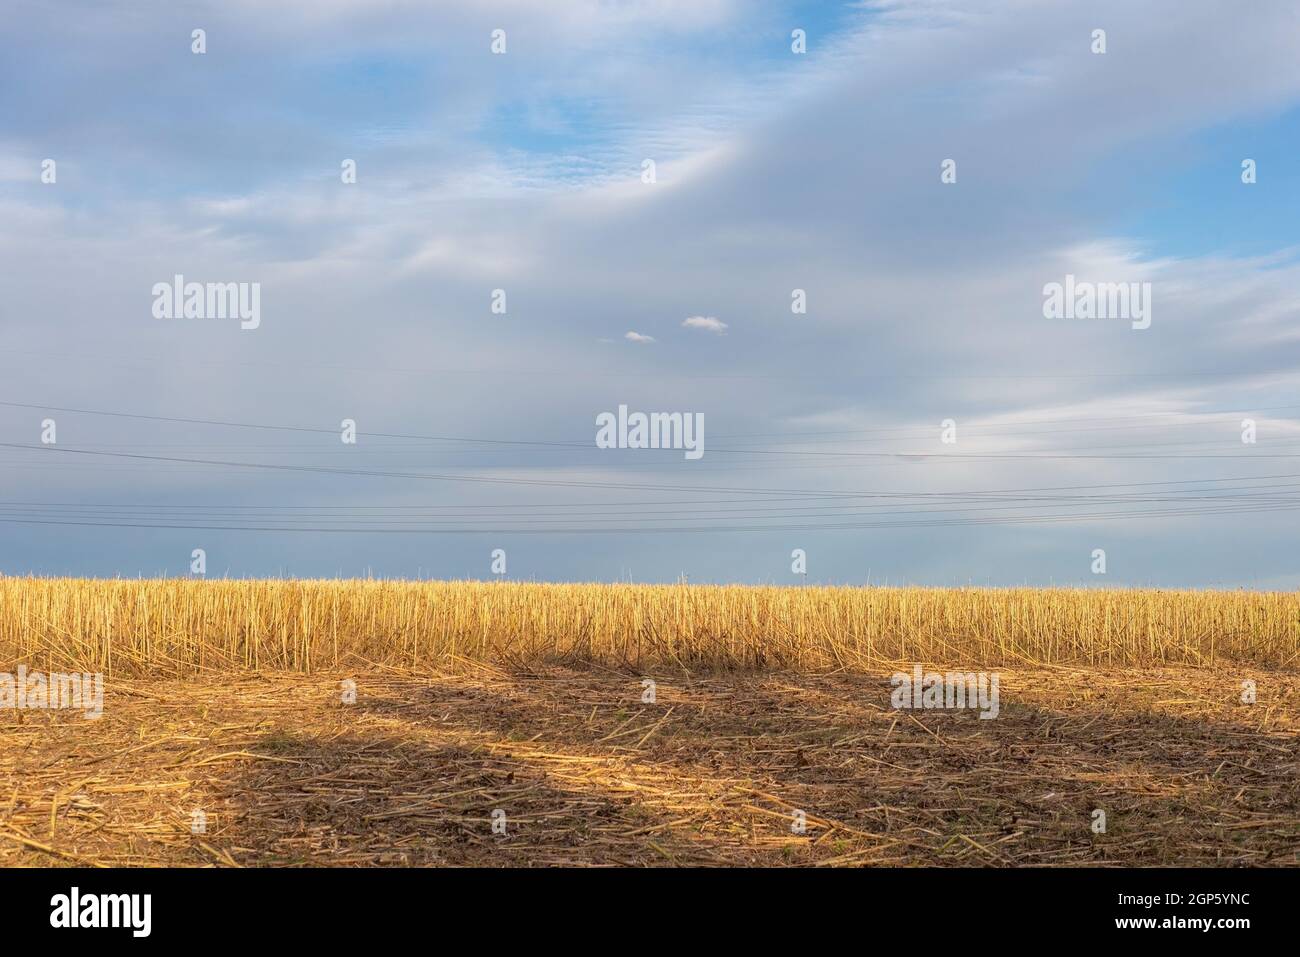 autumn countryside landscape of field after harvest against cloudy sky background. Stock Photo